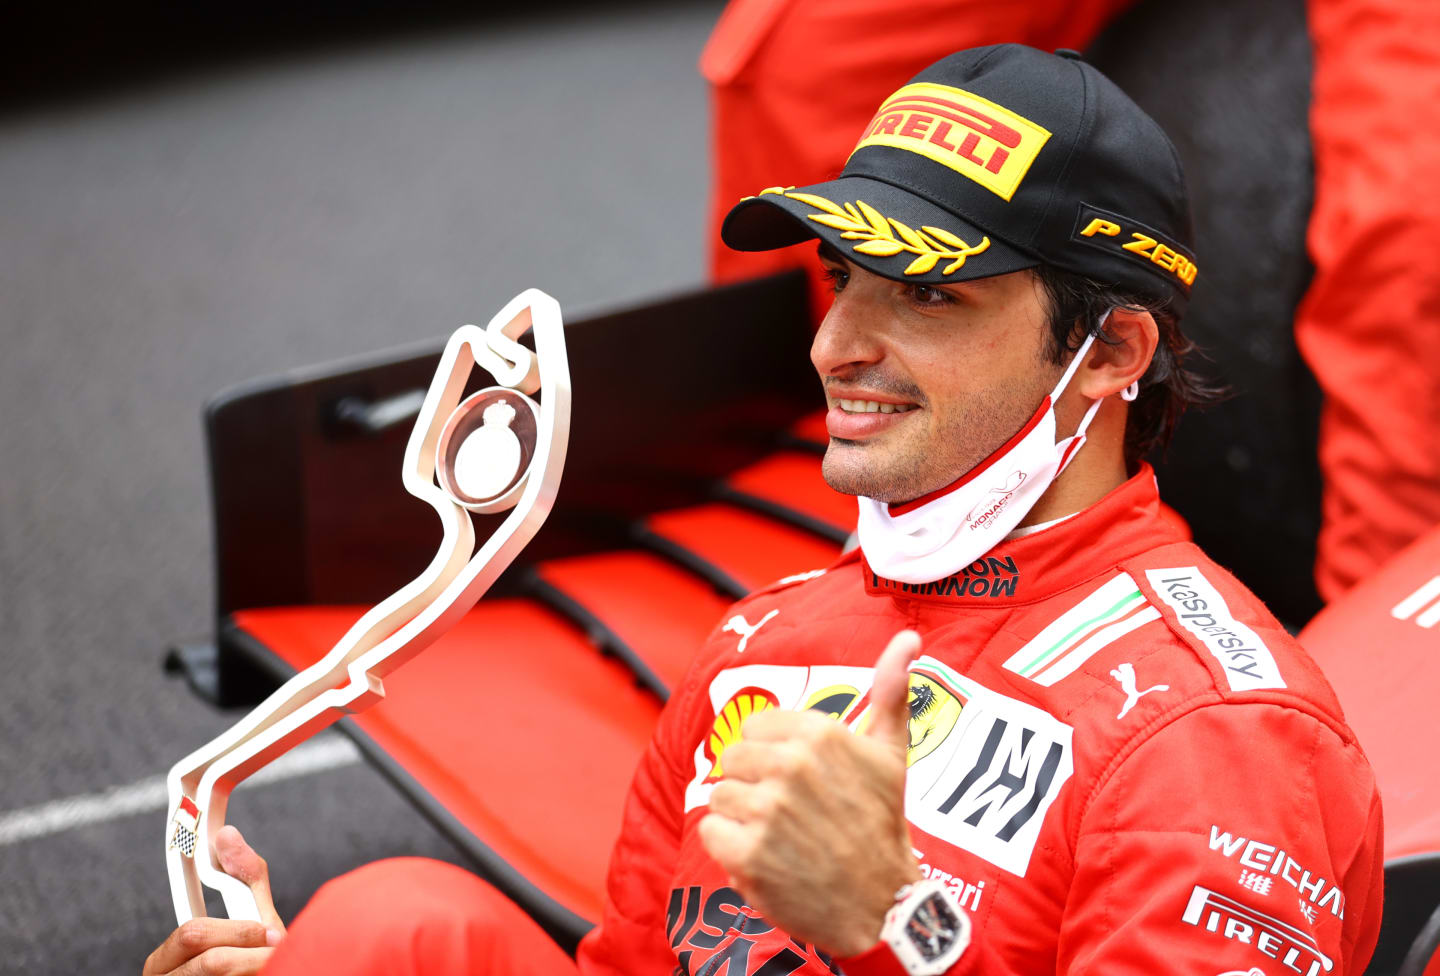 MONTE-CARLO, MONACO - MAY 23: Second placed Carlos Sainz of Spain and Ferrari celebrates in parc ferme during the F1 Grand Prix of Monaco at Circuit de Monaco on May 23, 2021 in Monte-Carlo, Monaco. (Photo by Bryn Lennon/Getty Images)